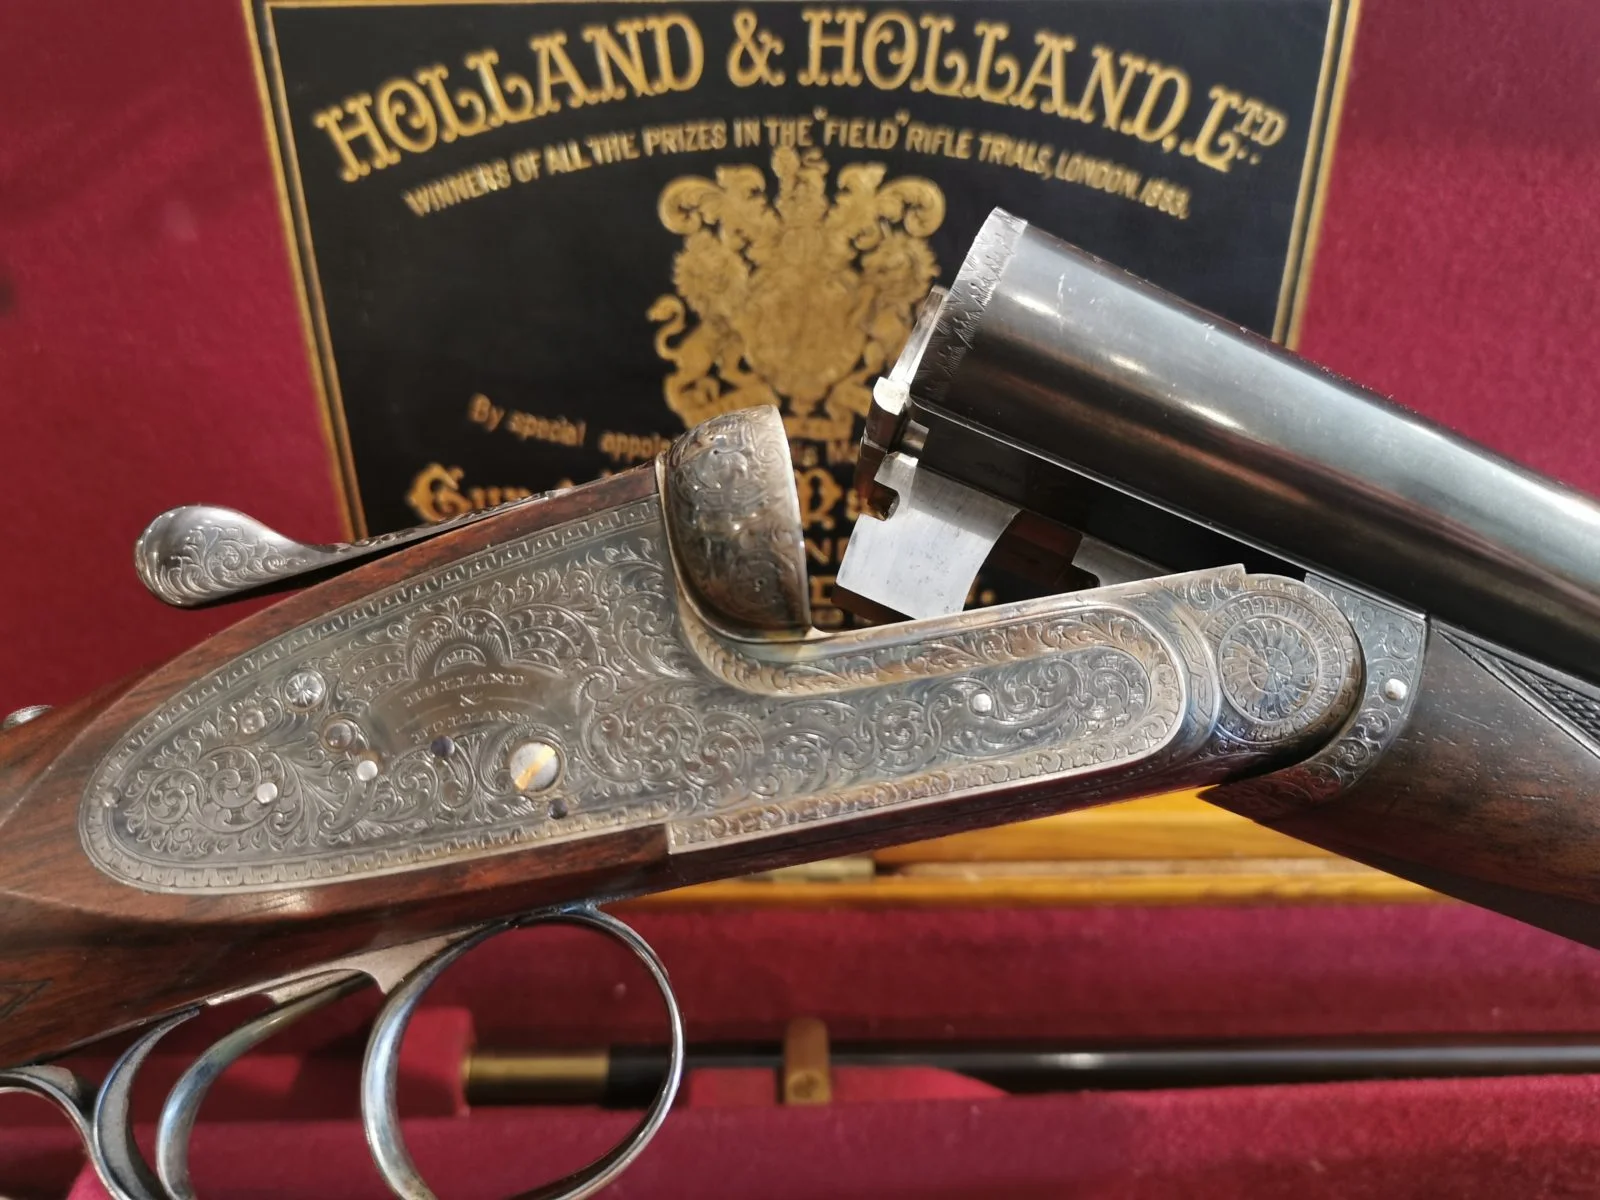 Holland shotgun with open barrell in front of the open guncase